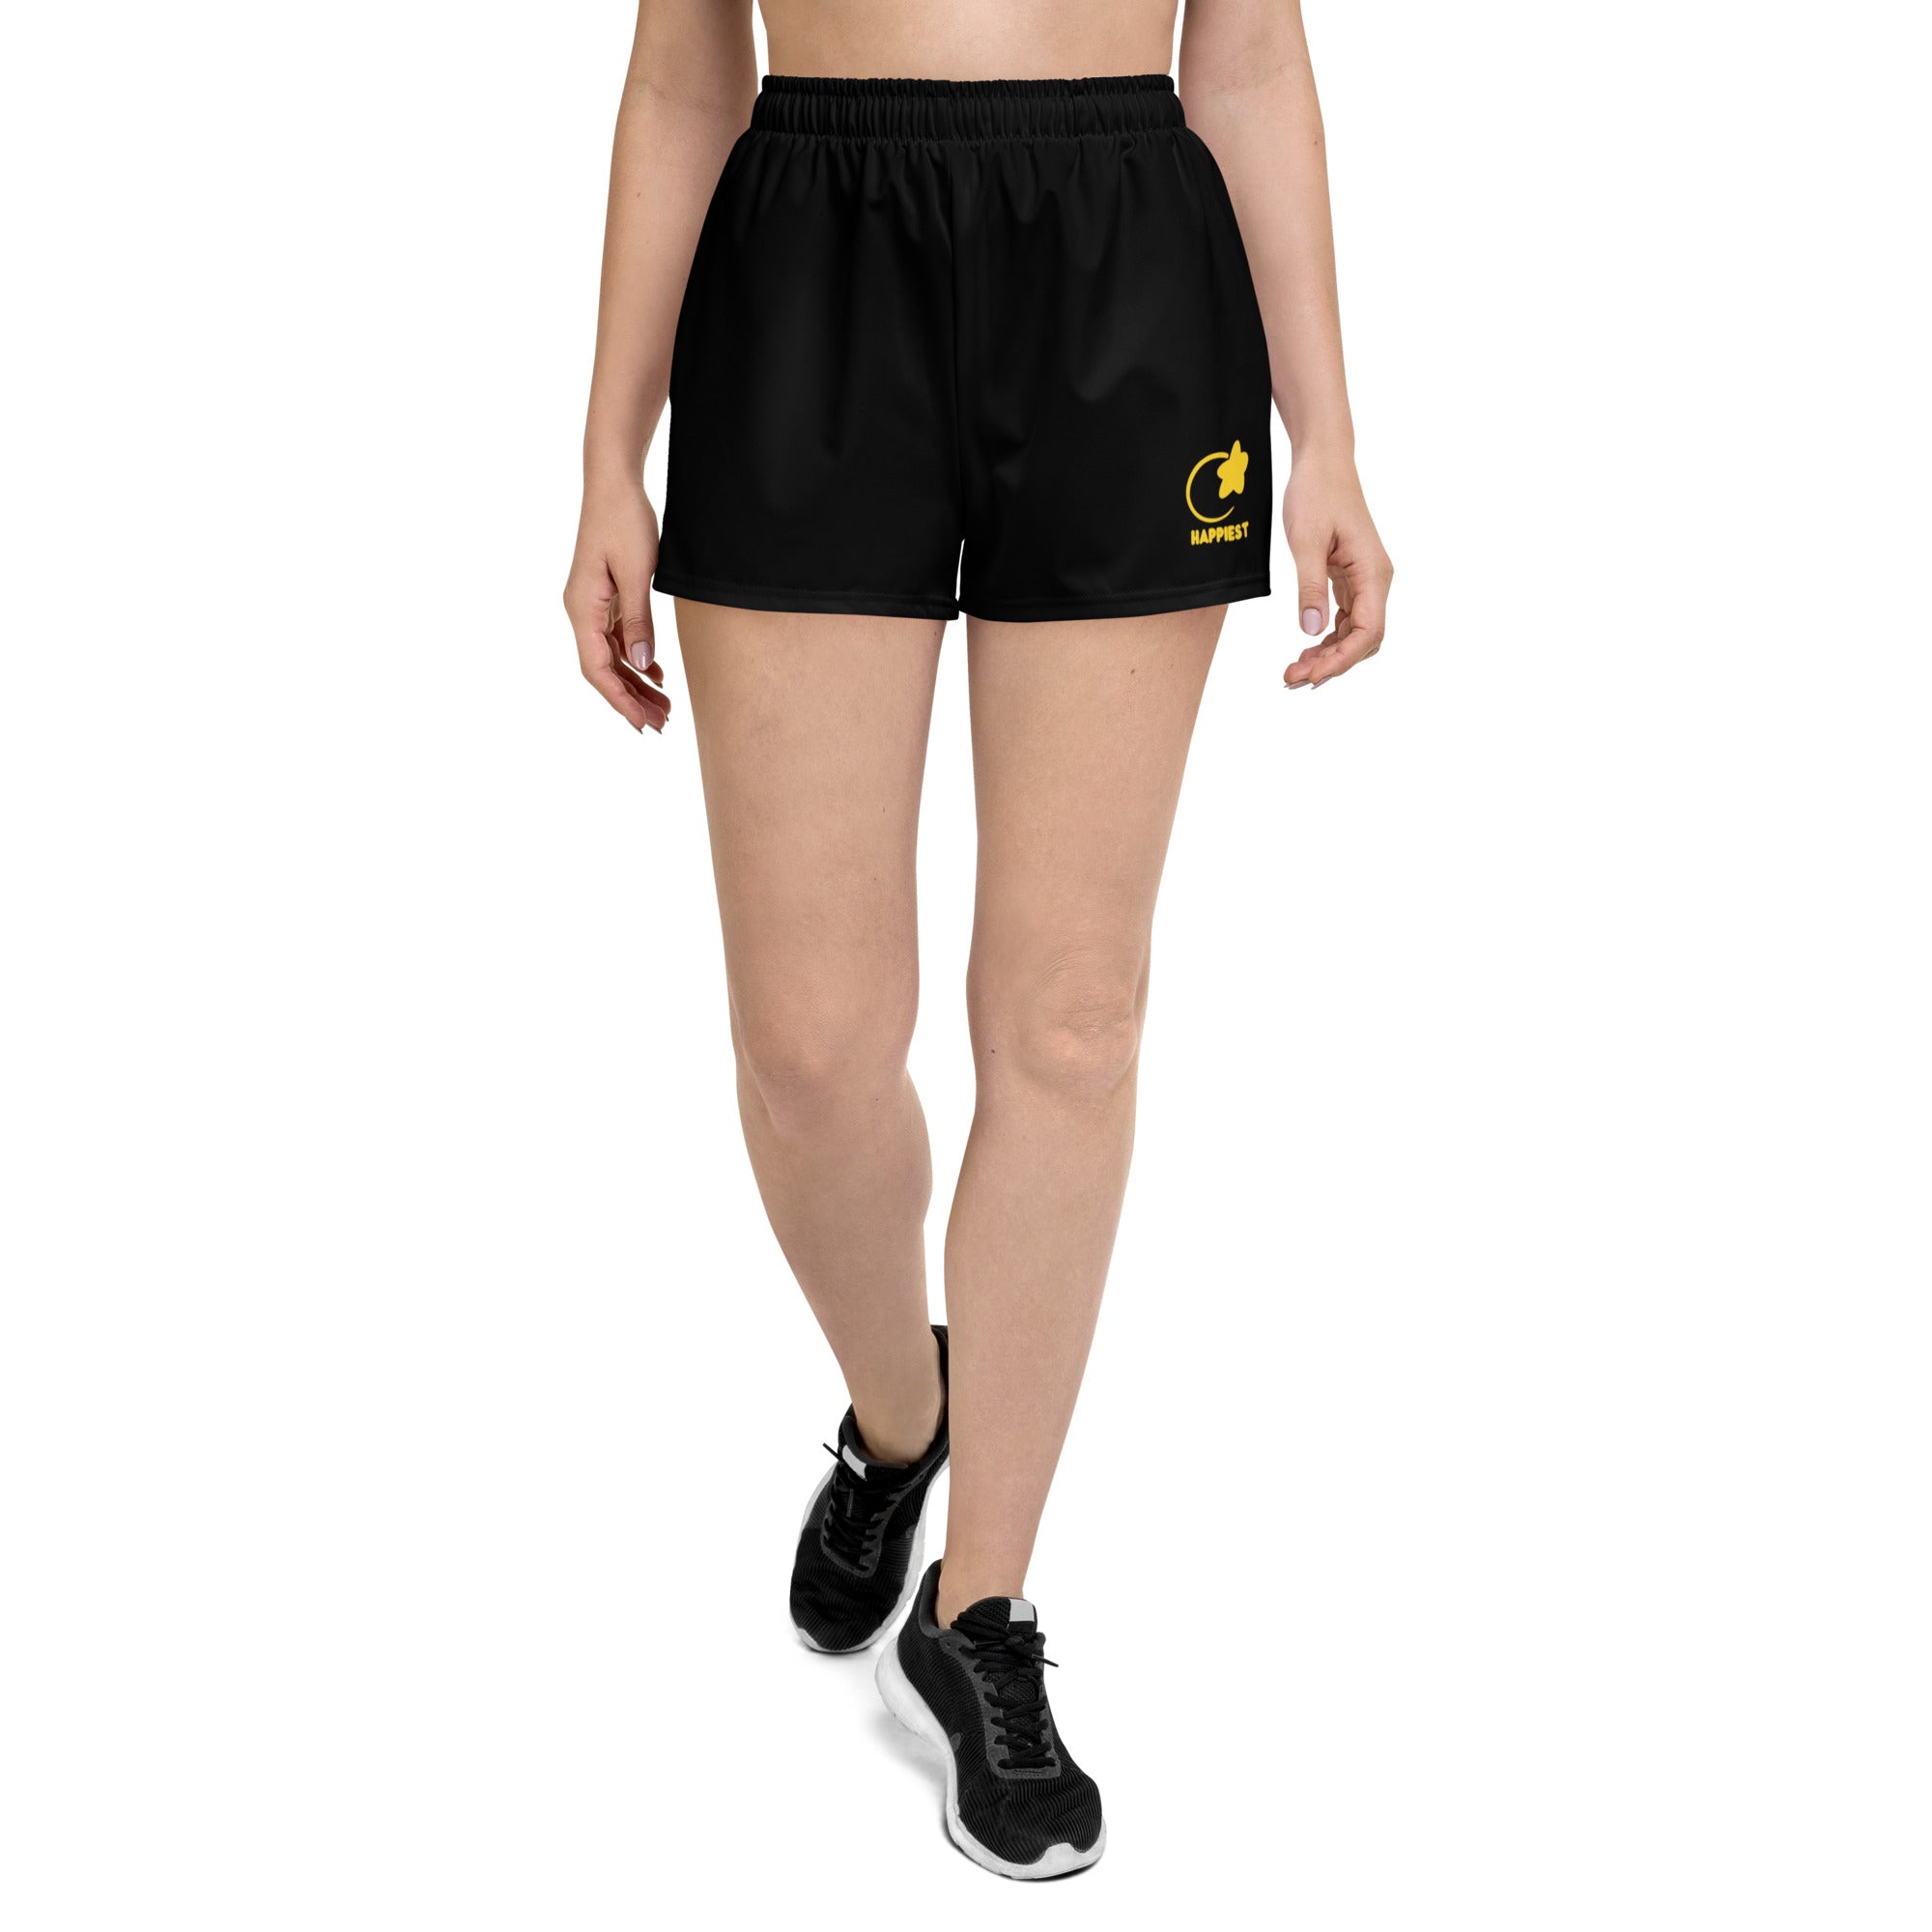 Happiest Black Women’s Recycled Athletic Shorts